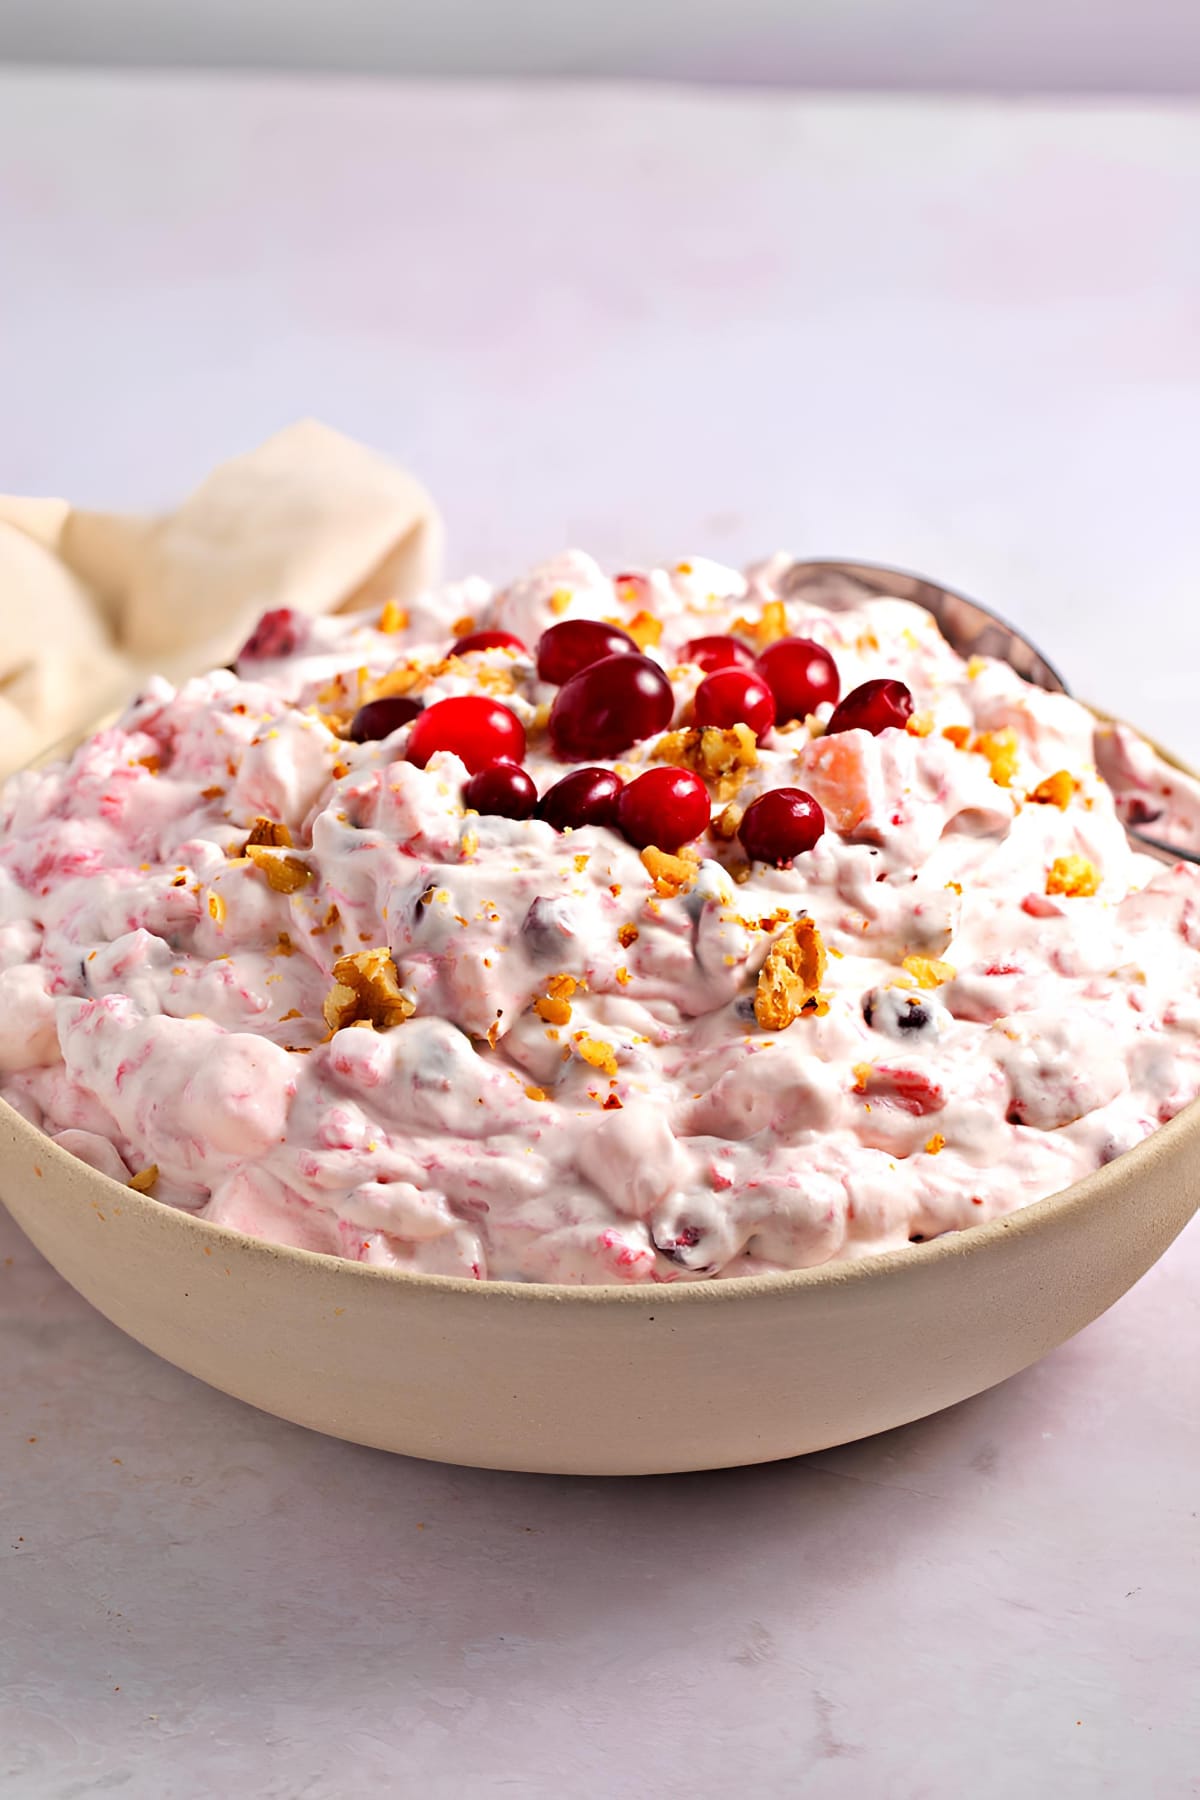 Close up view of a creamy salad with cranberries and walnuts on top